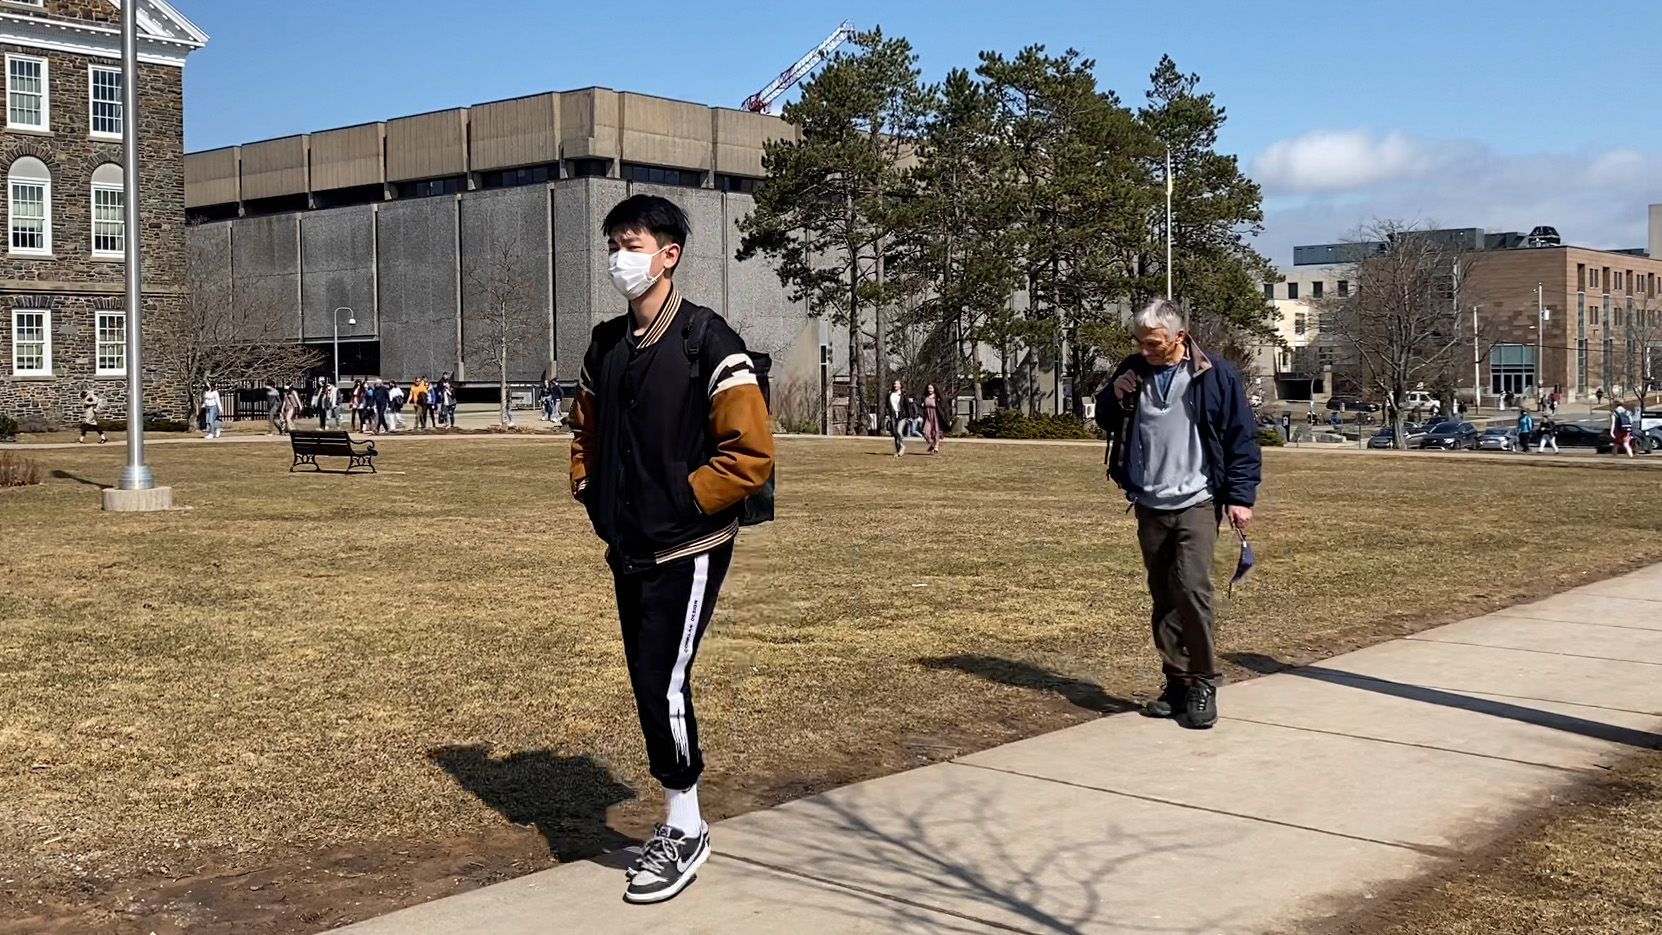 Dalhousie students and staff walk around campus, some with masks and some without. With the restrictions lifted on  March 21, 2022, masks will become optional at most locations in the province.